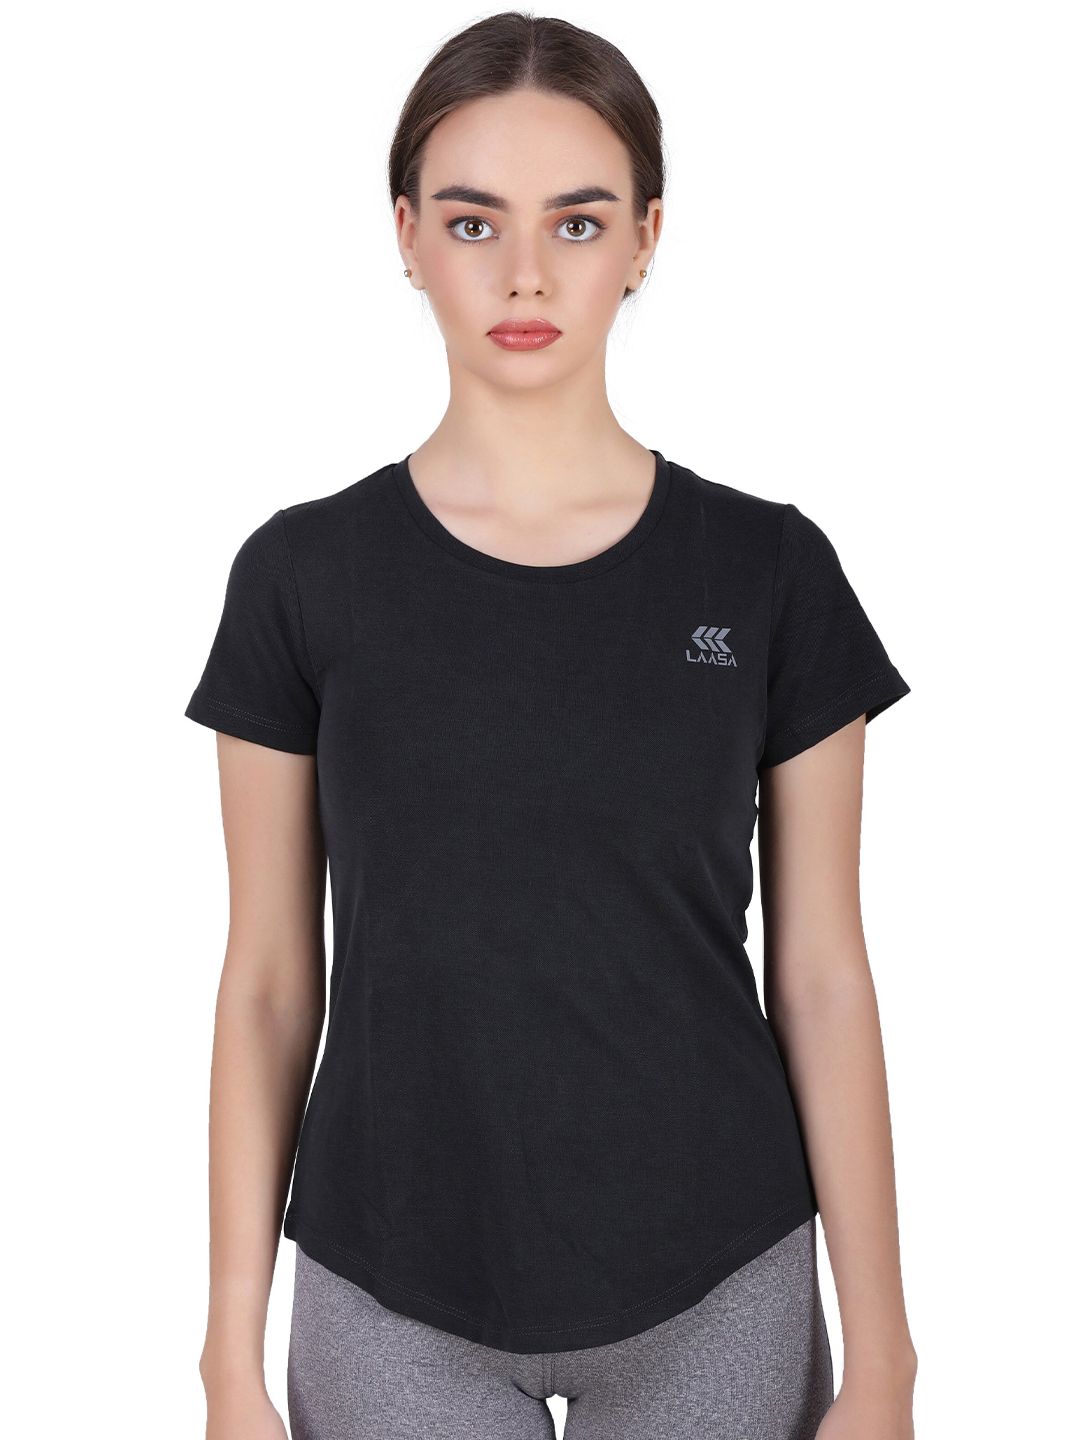 LAASA SPORTS Women Navy Blue Training or Gym Cotton T-shirt Price in India